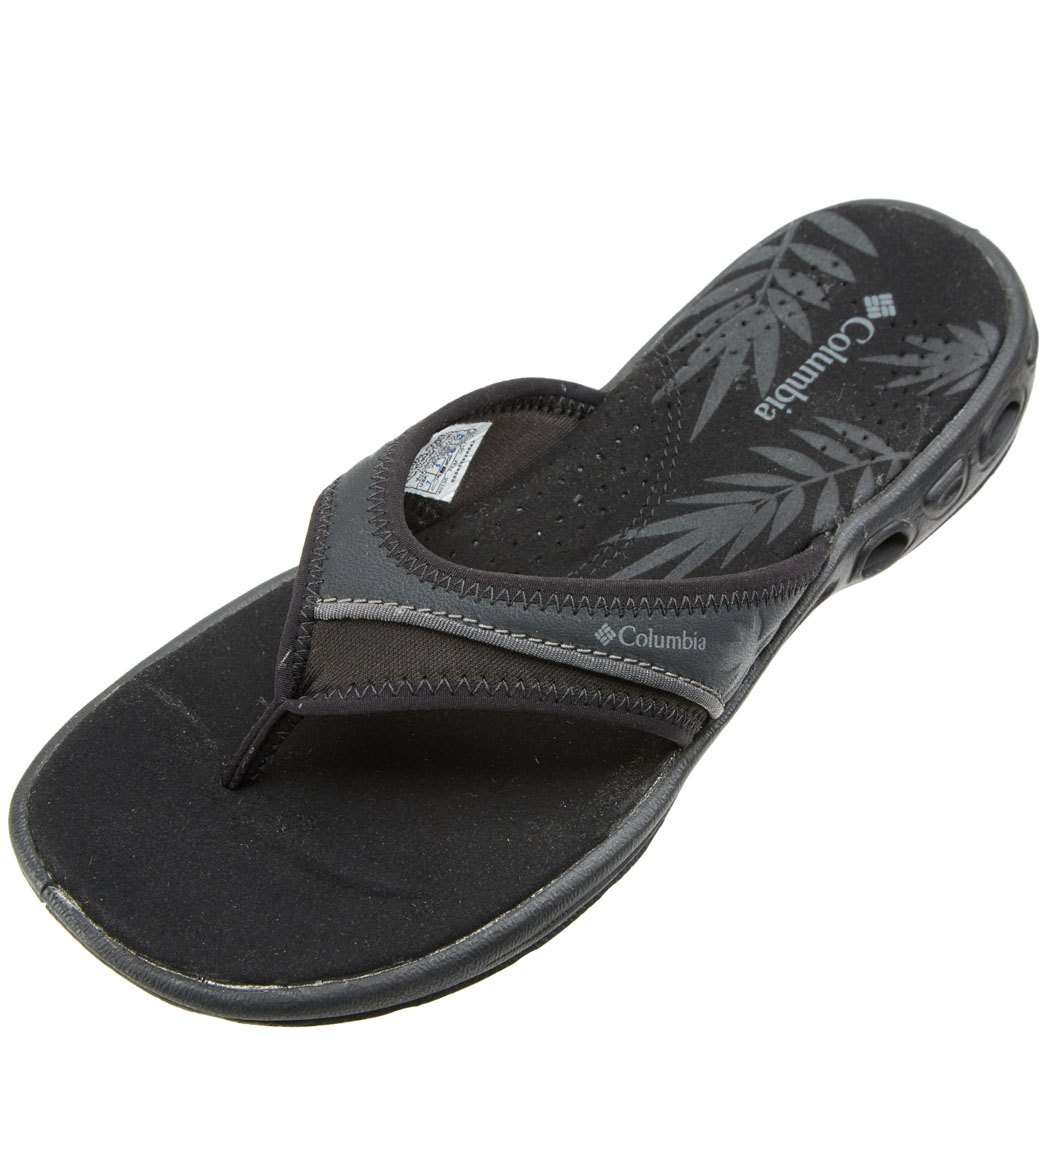 Columbia Women's Kambi Vent Flip Flop at SwimOutlet.com - Free Shipping